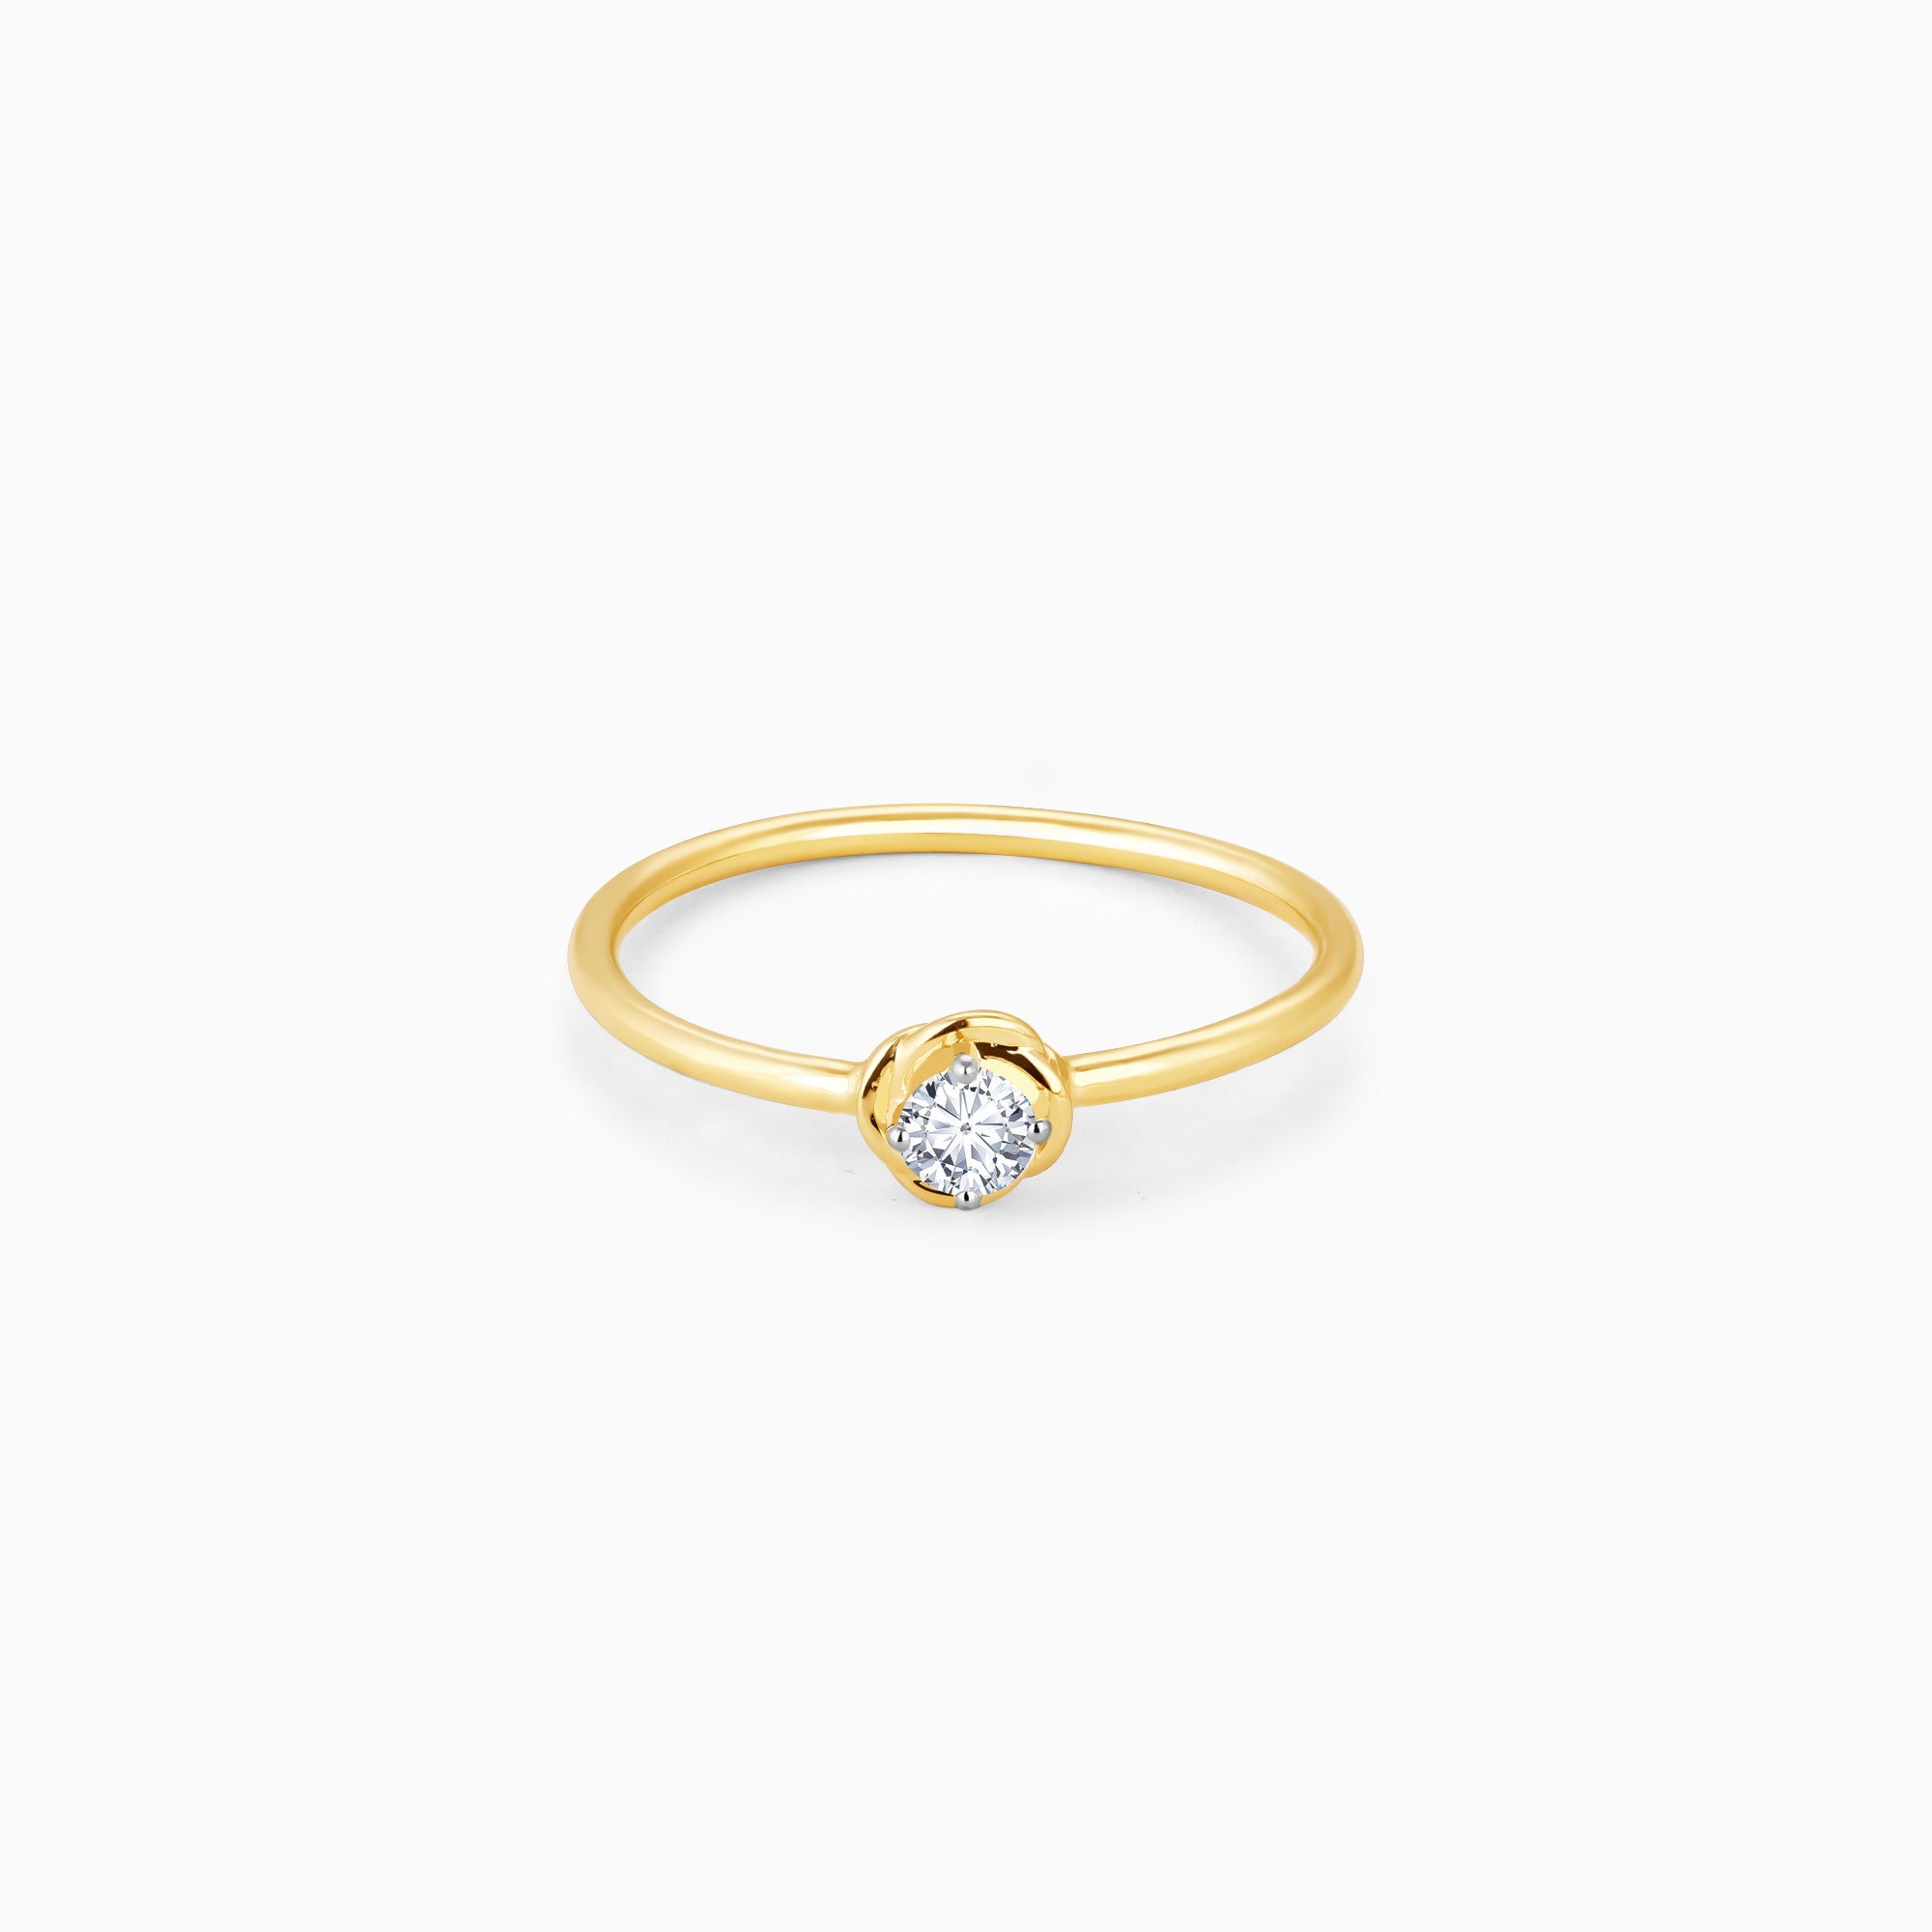 A Beautiful Small Round Monolith Moissanite Diamond Ring, This Charming Ring  of Round Cut Diamond Ring/ the Band, 18k Yellow Gold - Etsy | Round cut diamond  rings, Wedding rings unique, Moissanite